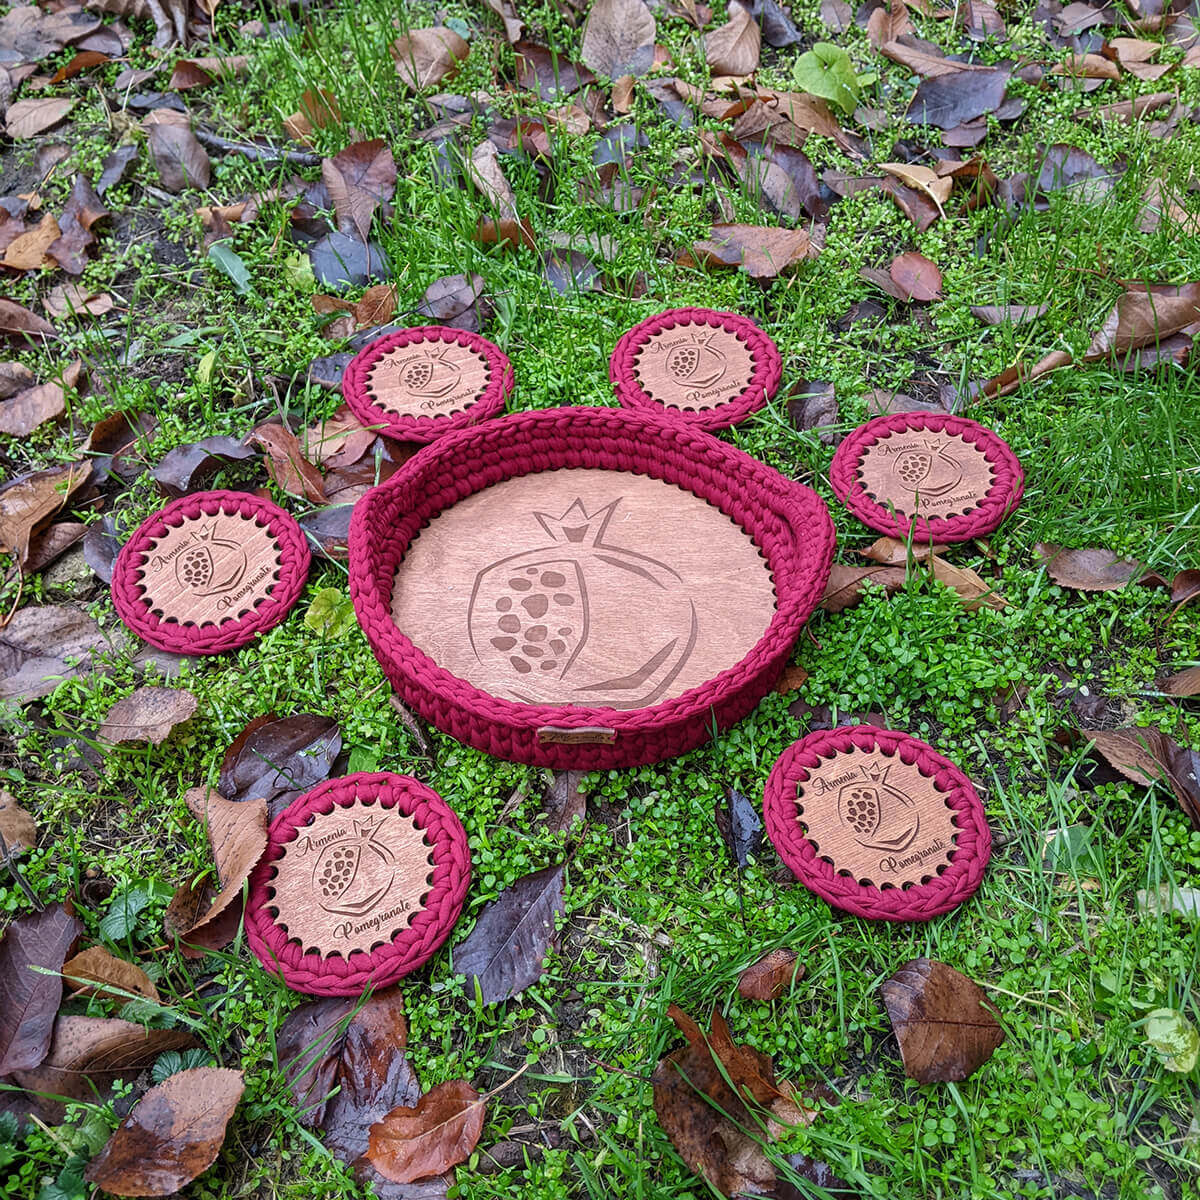 Crochet Tray With Cup Stands